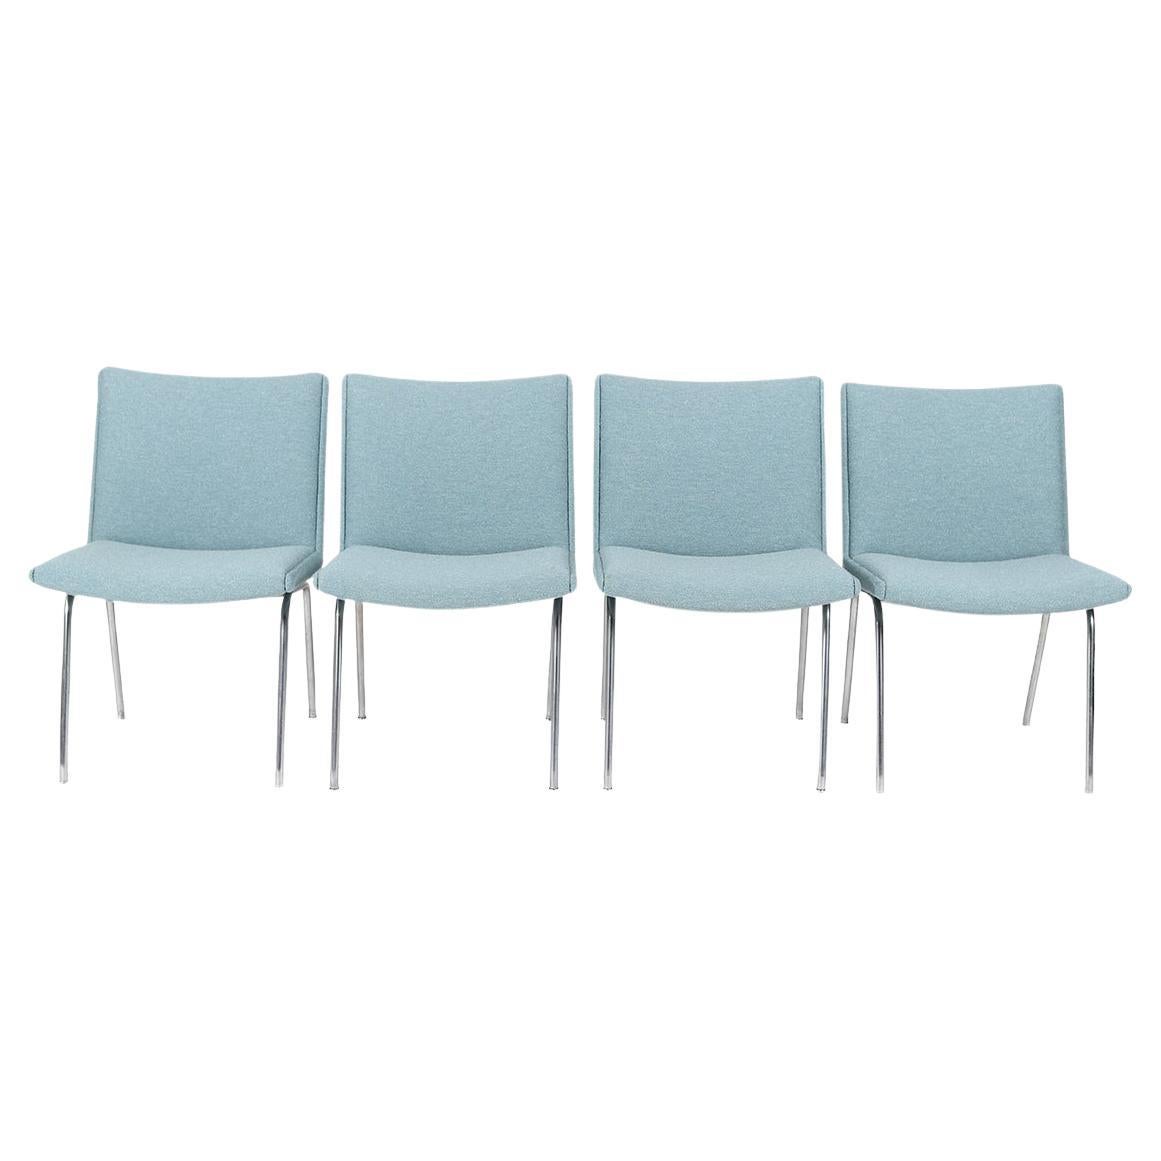 Danish Modern "Airport" Chairs by Hans J. Wegner For Sale